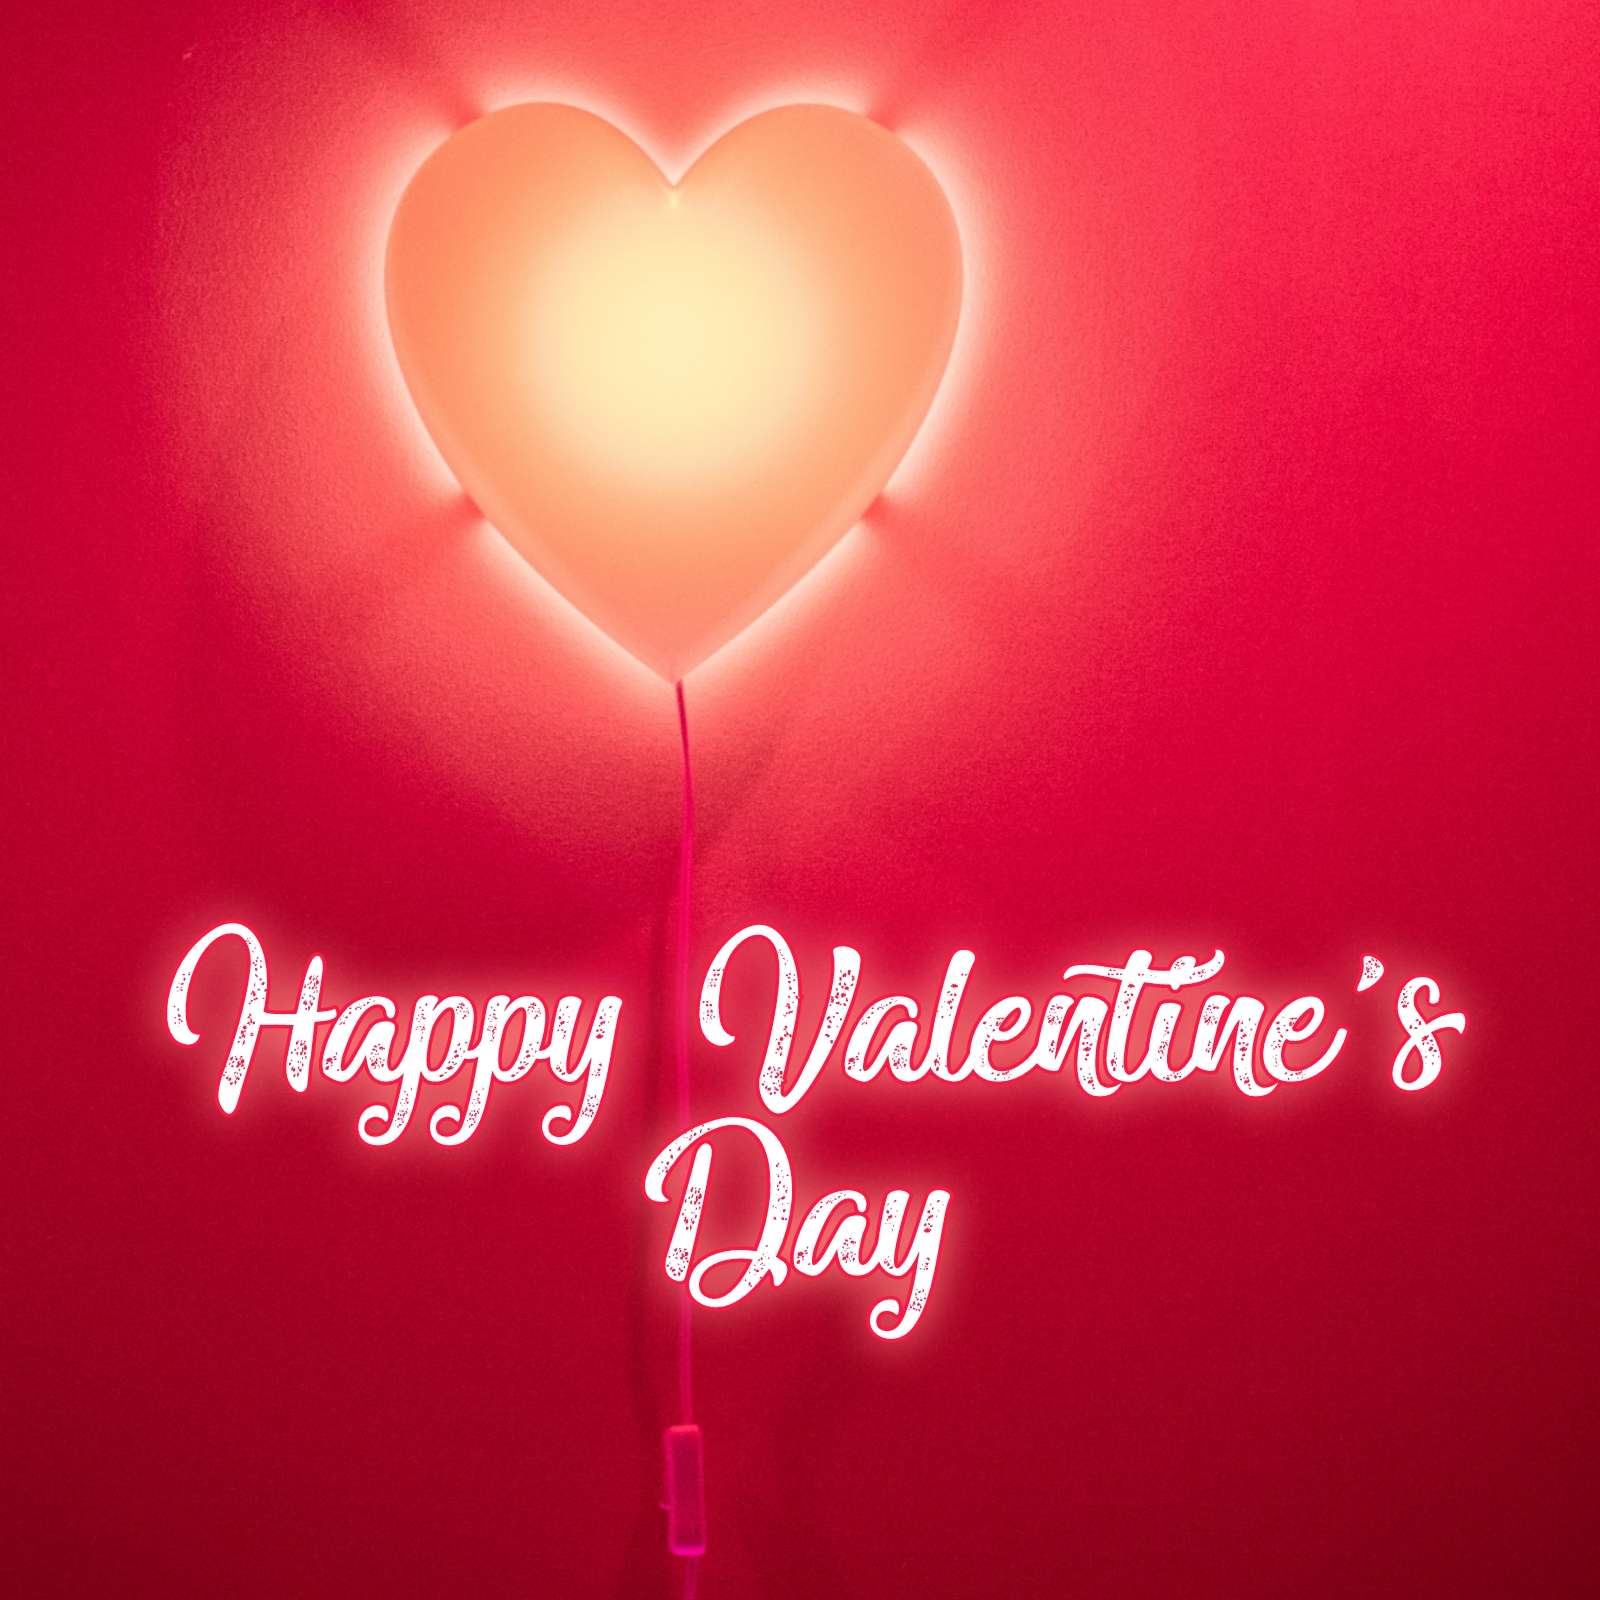 Happy Valentines Day 2022 Images Download